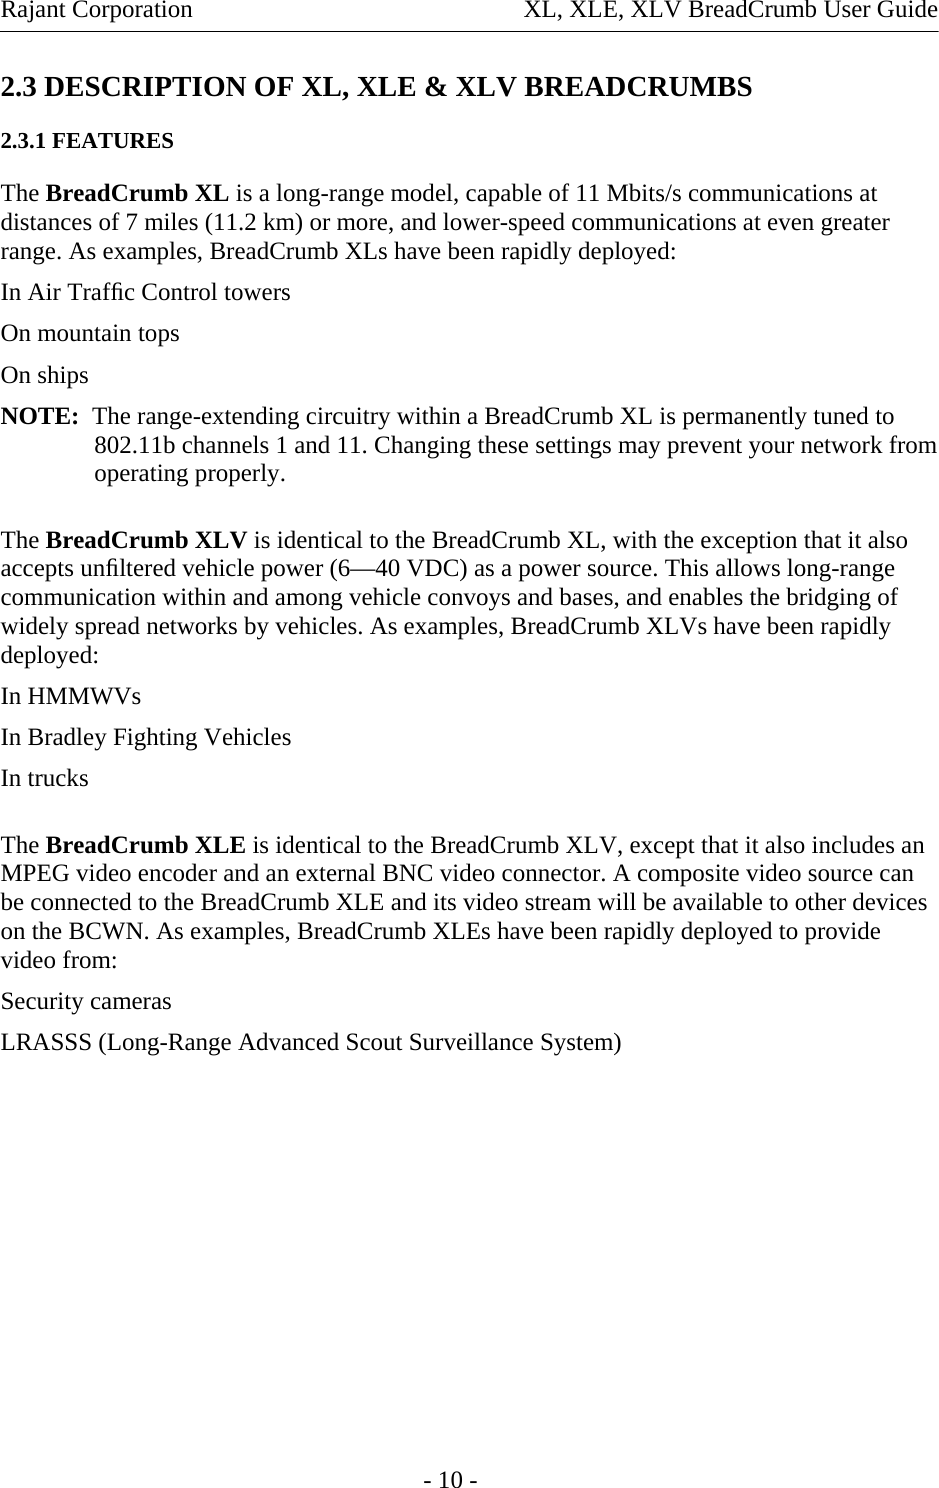 Rajant Corporation  XL, XLE, XLV BreadCrumb User Guide - 10 - 2.3 DESCRIPTION OF XL, XLE &amp; XLV BREADCRUMBS 2.3.1 FEATURES The BreadCrumb XL is a long-range model, capable of 11 Mbits/s communications at distances of 7 miles (11.2 km) or more, and lower-speed communications at even greater range. As examples, BreadCrumb XLs have been rapidly deployed: In Air Trafﬁc Control towers  On mountain tops  On ships  NOTE:  The range-extending circuitry within a BreadCrumb XL is permanently tuned to 802.11b channels 1 and 11. Changing these settings may prevent your network from operating properly. The BreadCrumb XLV is identical to the BreadCrumb XL, with the exception that it also accepts unﬁltered vehicle power (6—40 VDC) as a power source. This allows long-range communication within and among vehicle convoys and bases, and enables the bridging of widely spread networks by vehicles. As examples, BreadCrumb XLVs have been rapidly deployed: In HMMWVs  In Bradley Fighting Vehicles  In trucks  The BreadCrumb XLE is identical to the BreadCrumb XLV, except that it also includes an MPEG video encoder and an external BNC video connector. A composite video source can be connected to the BreadCrumb XLE and its video stream will be available to other devices on the BCWN. As examples, BreadCrumb XLEs have been rapidly deployed to provide video from:  Security cameras  LRASSS (Long-Range Advanced Scout Surveillance System)         